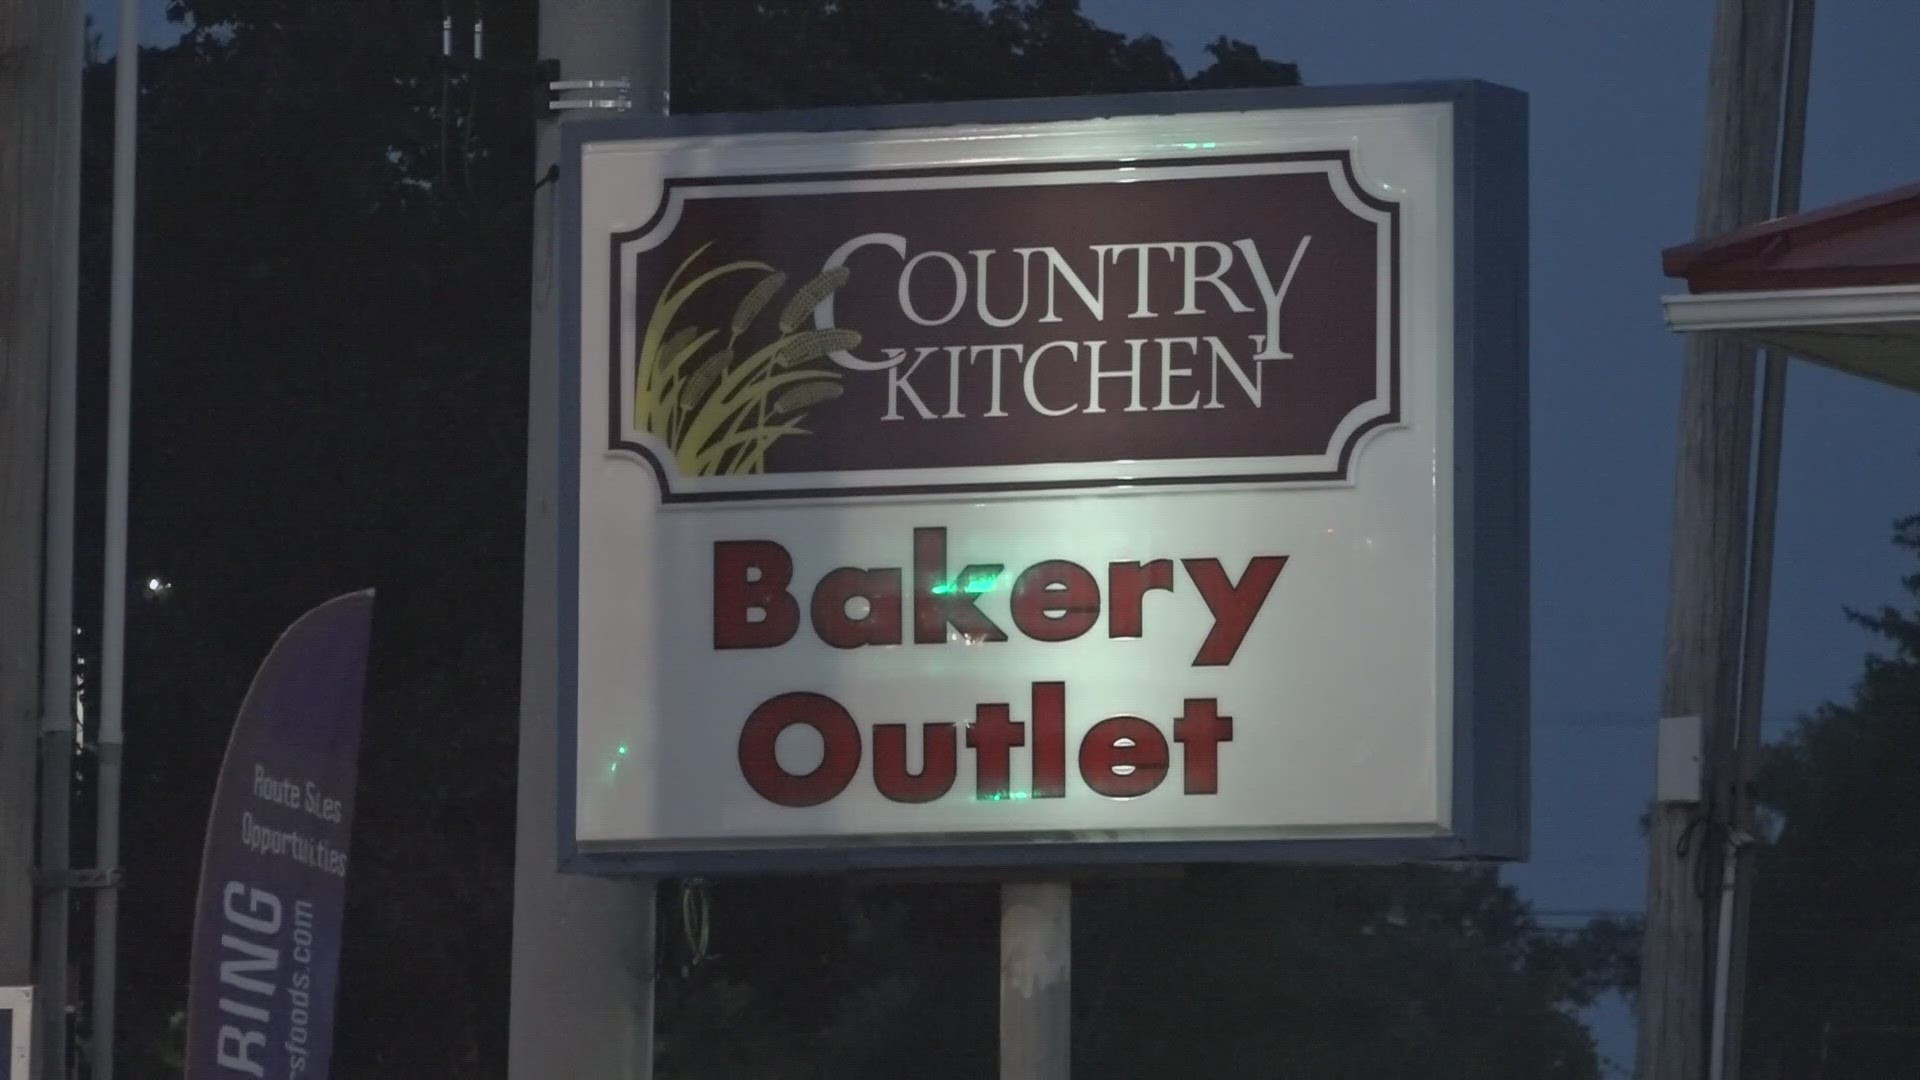 The shooting occurred Wednesday afternoon at the Country Kitchen Bakery Outlet.